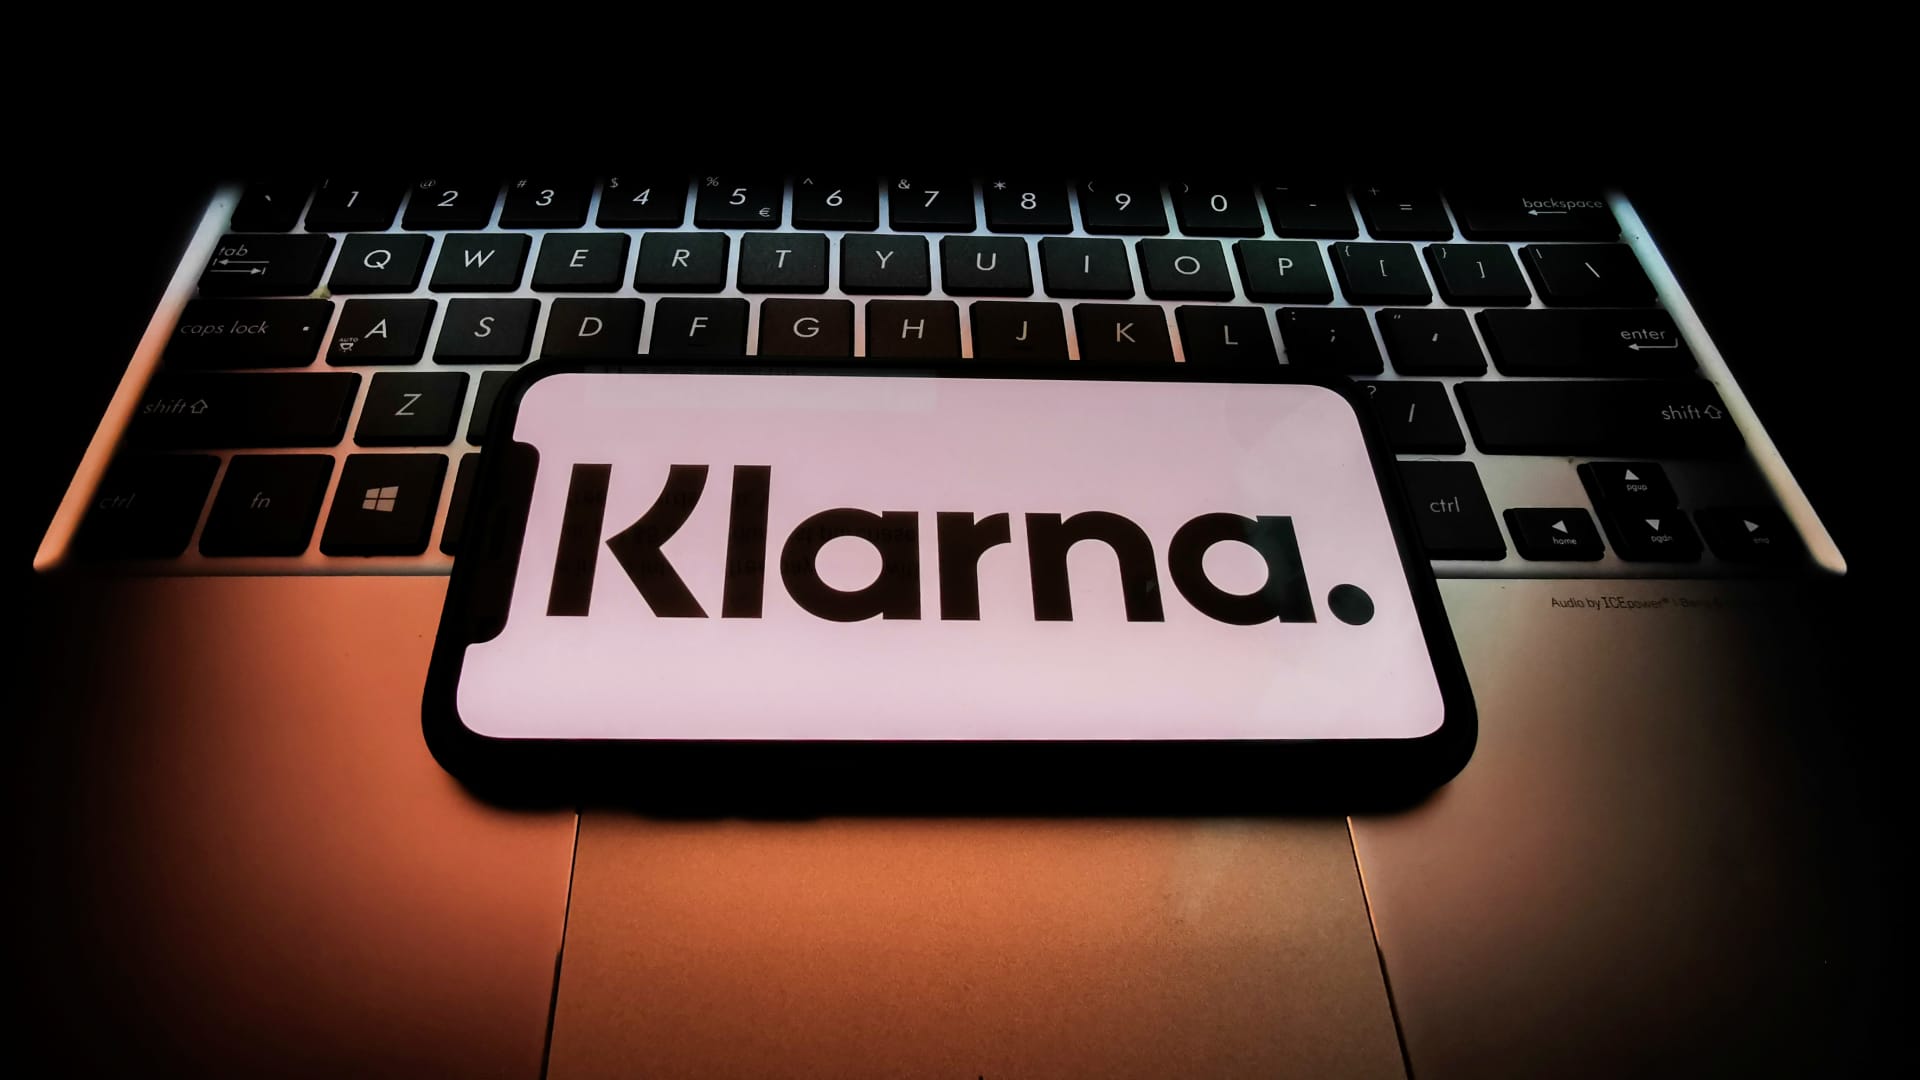 Buy now, pay later firm Klarna cuts losses in first half but falls short of profit